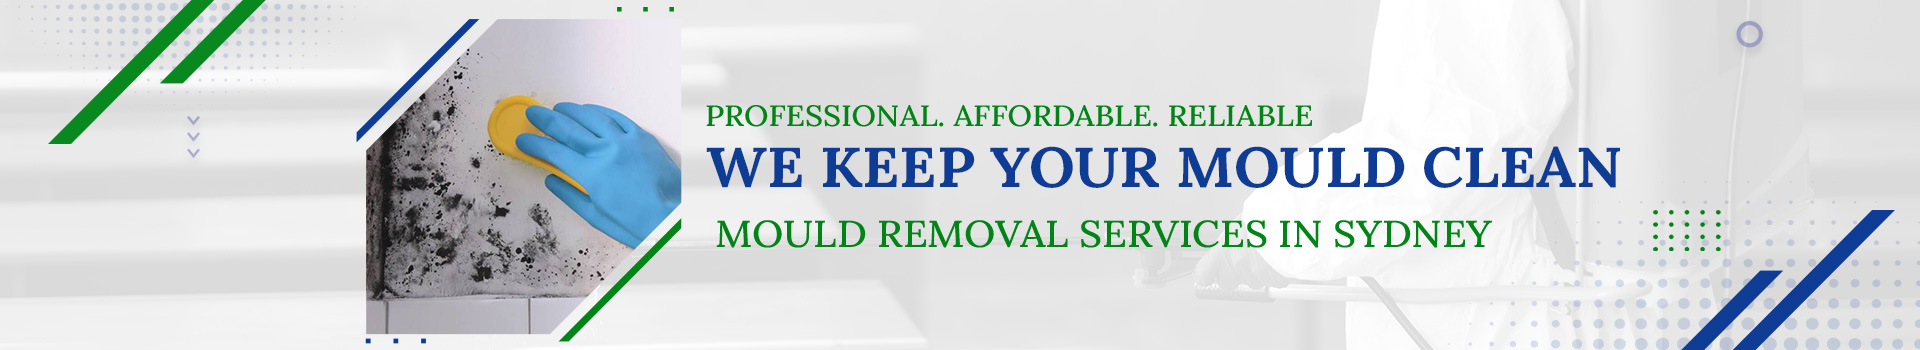 Mould Removal services in Sydney